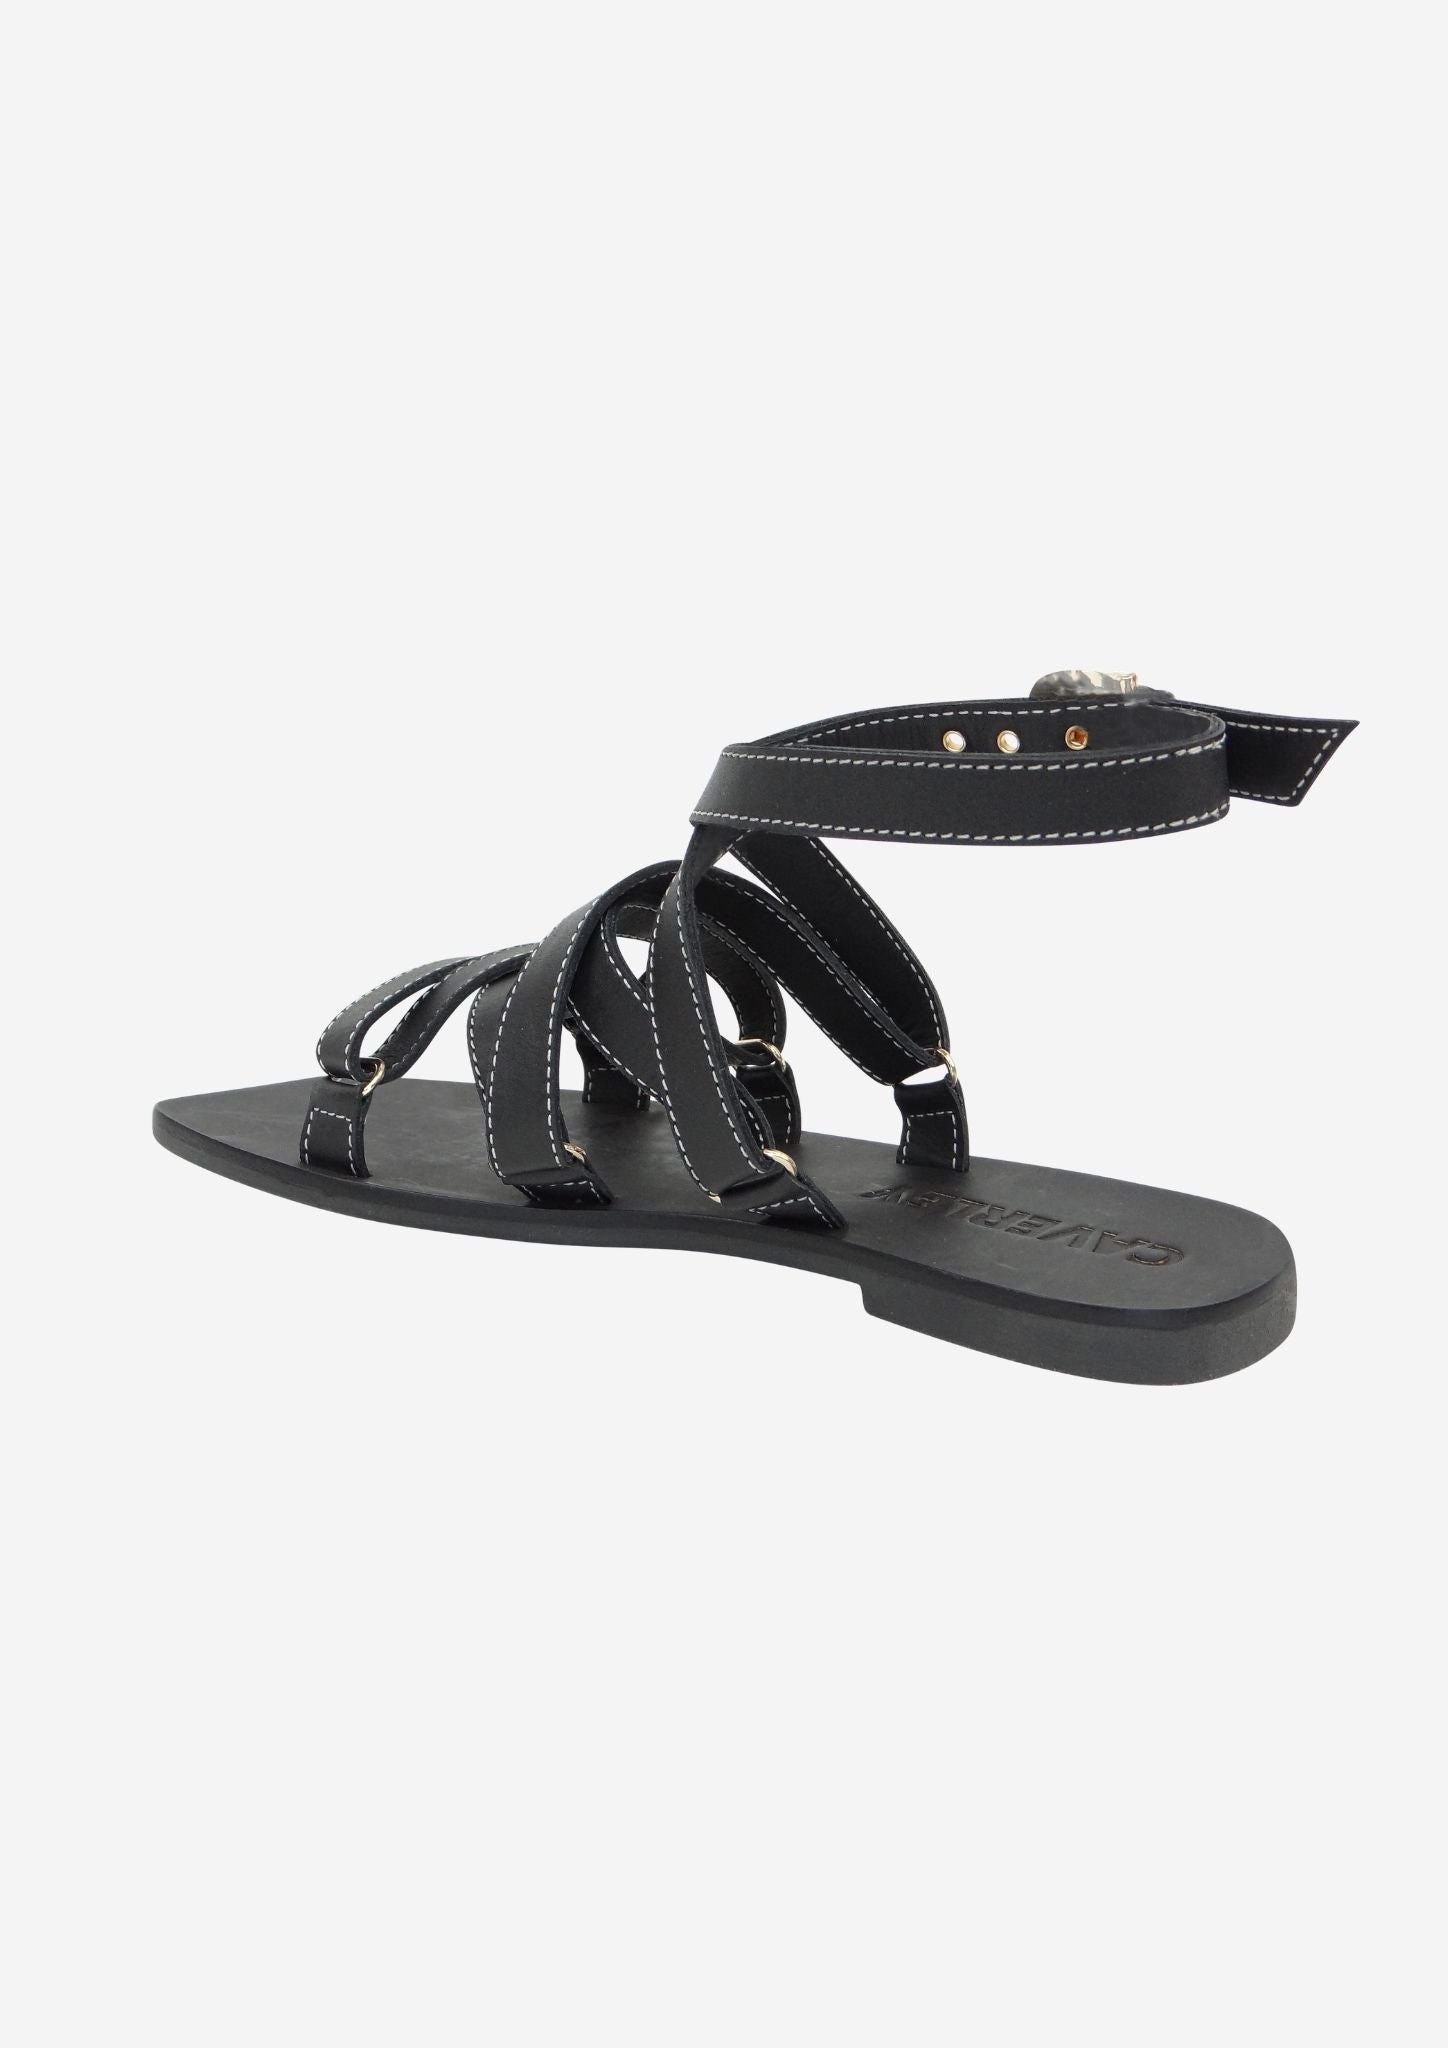 CAVERLEY Addie Slide in Black 21S105C Black FROM EIGHTYWINGOLD - OFFICIAL BRAND PARTNER